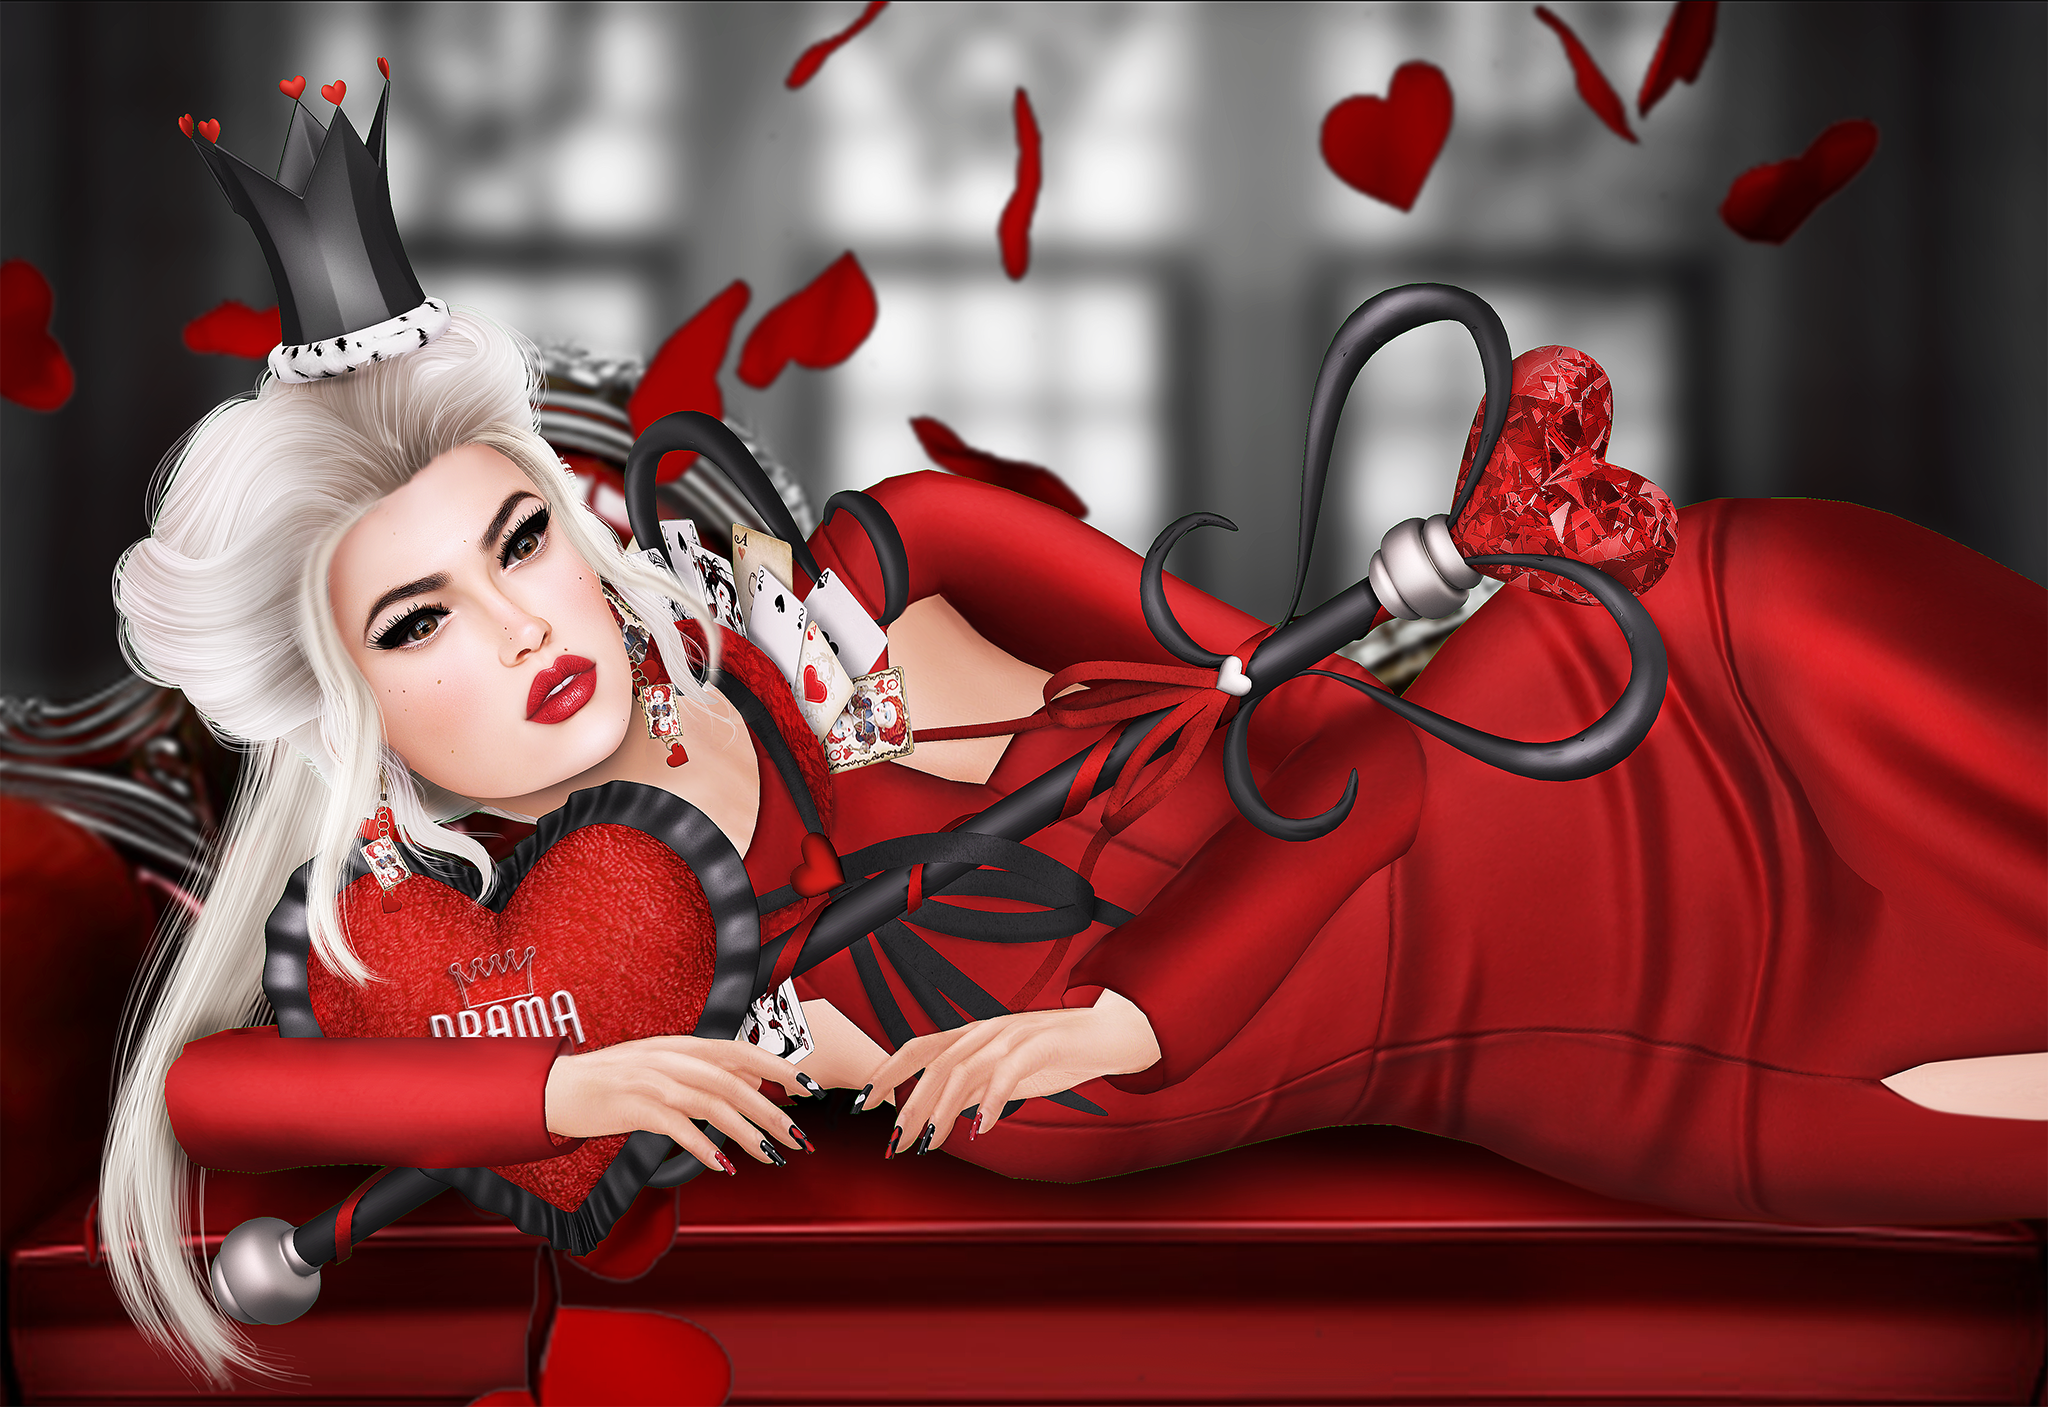 On me: Astralia – Queen of hearts set (made of: sceptre, collar R...